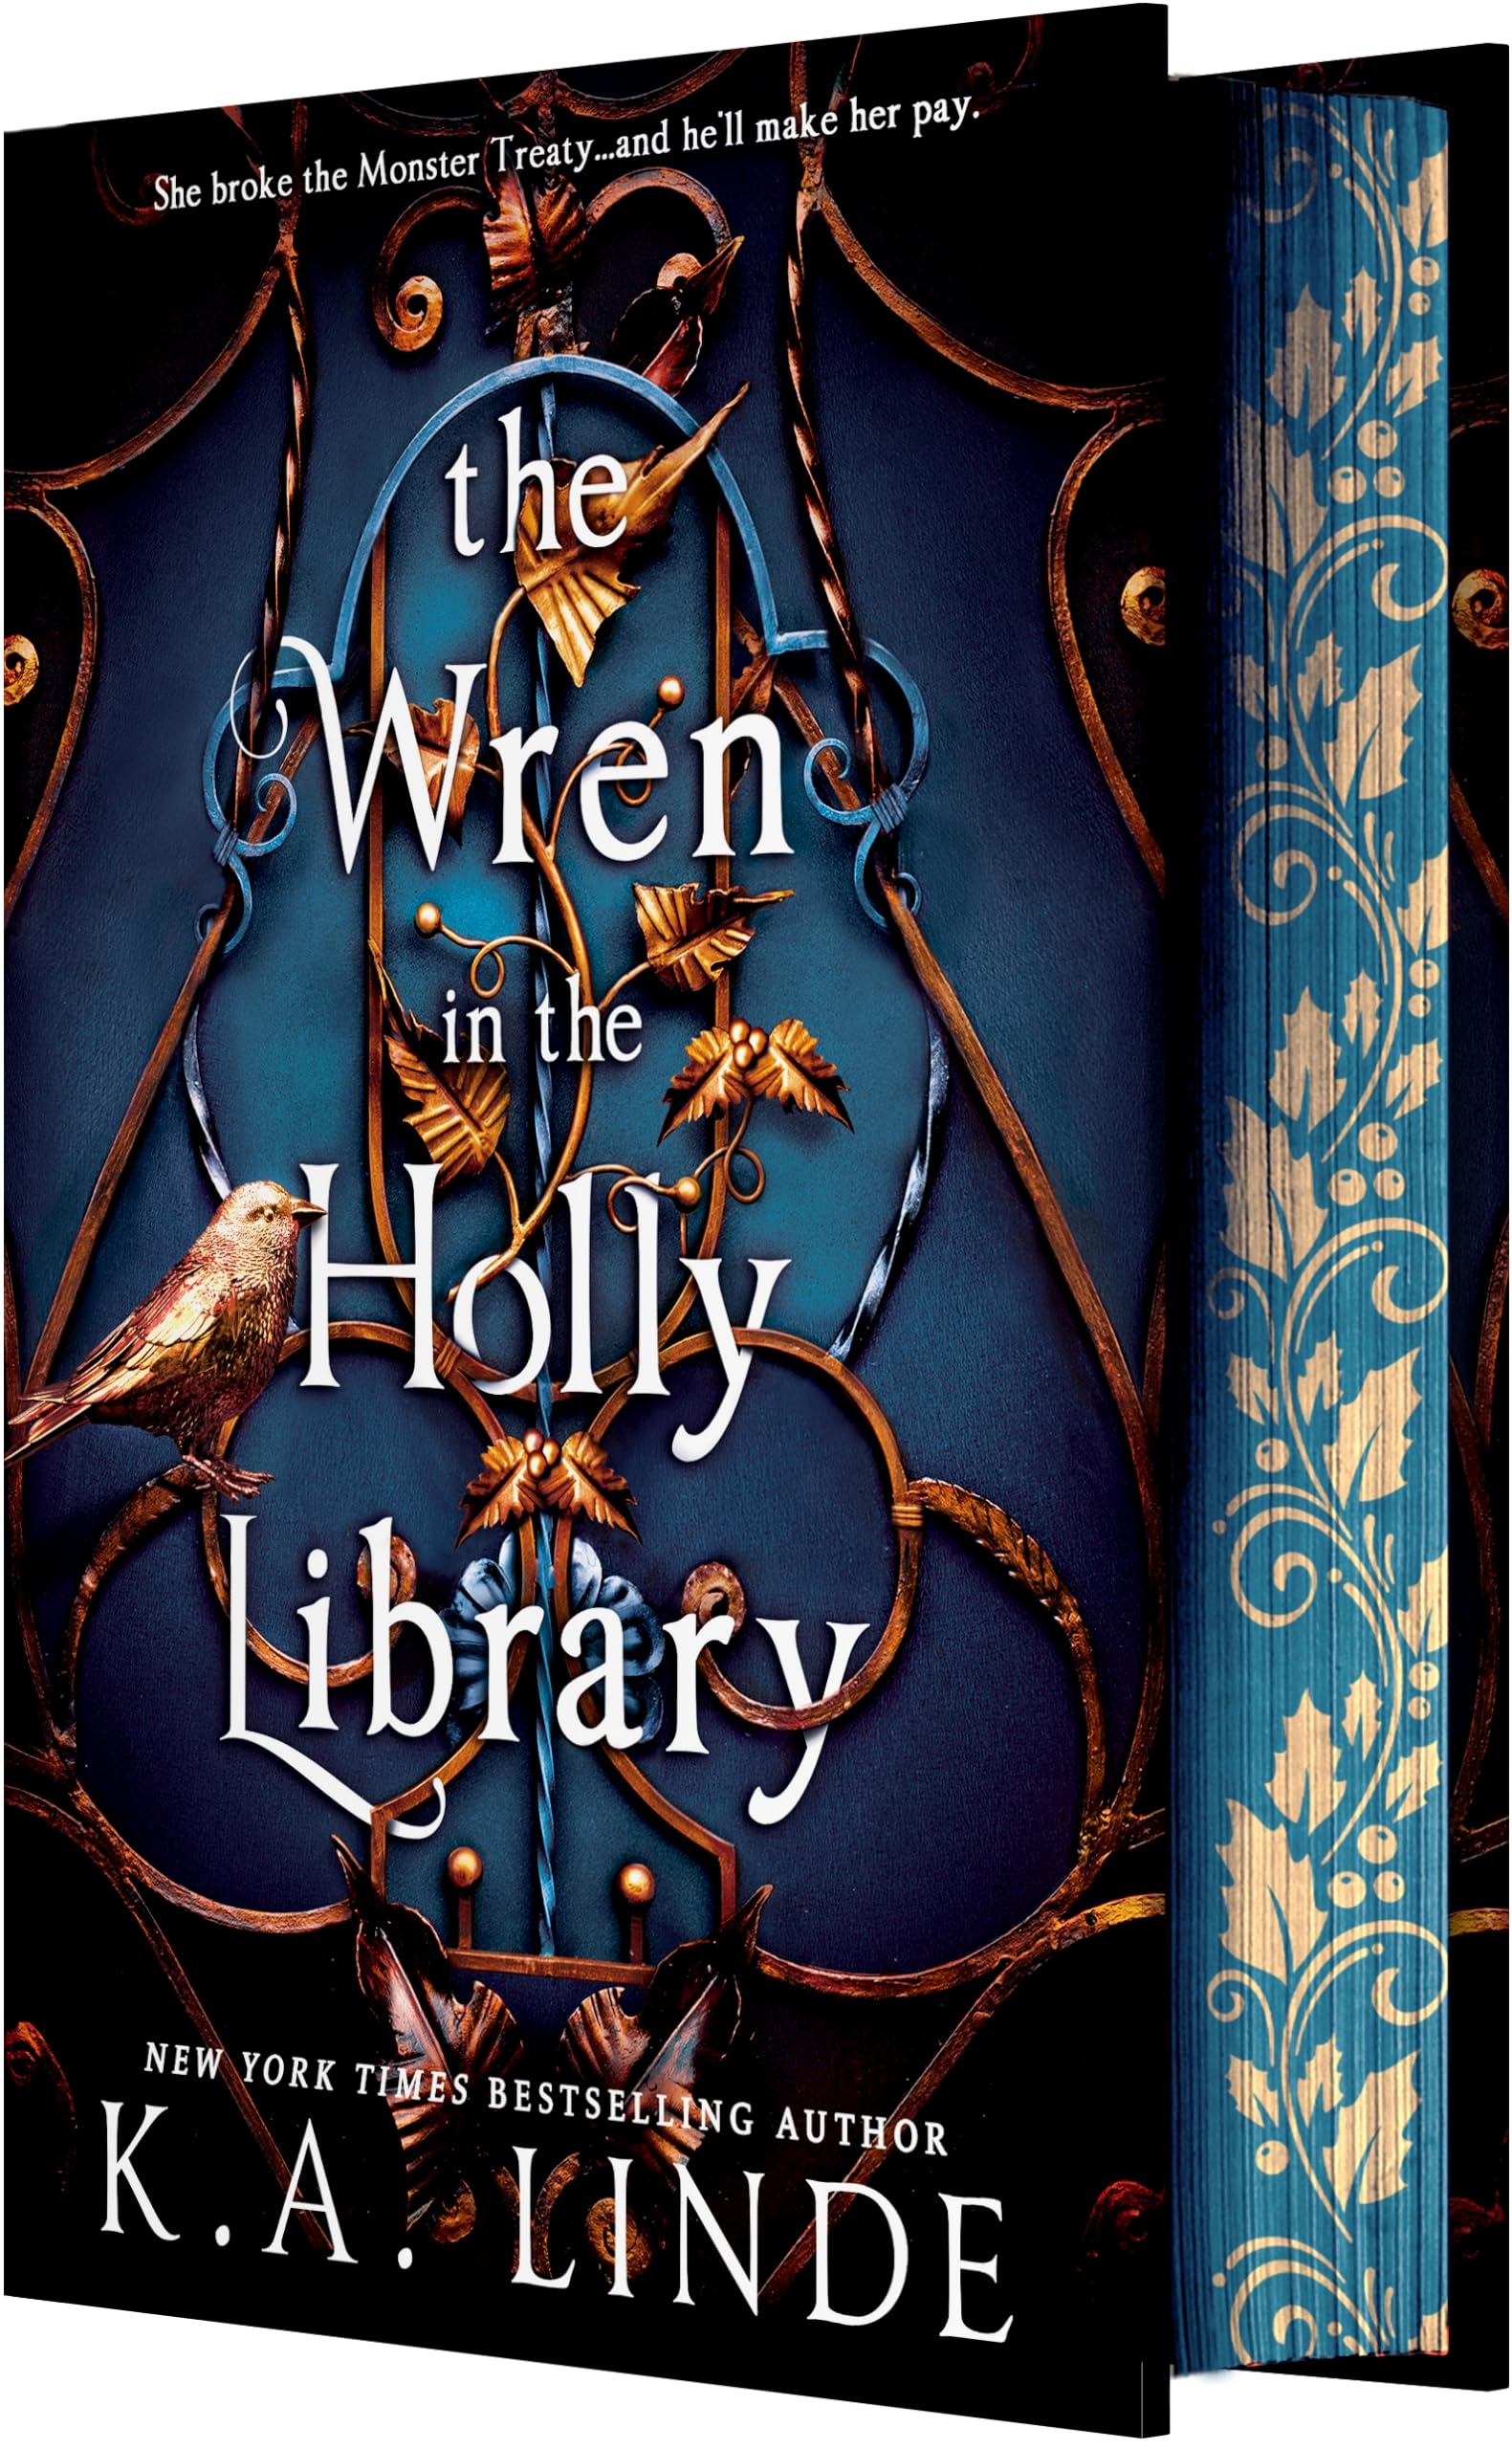 The Wren in the Holly Library (Deluxe Limited Edition) by Linde, K. A.